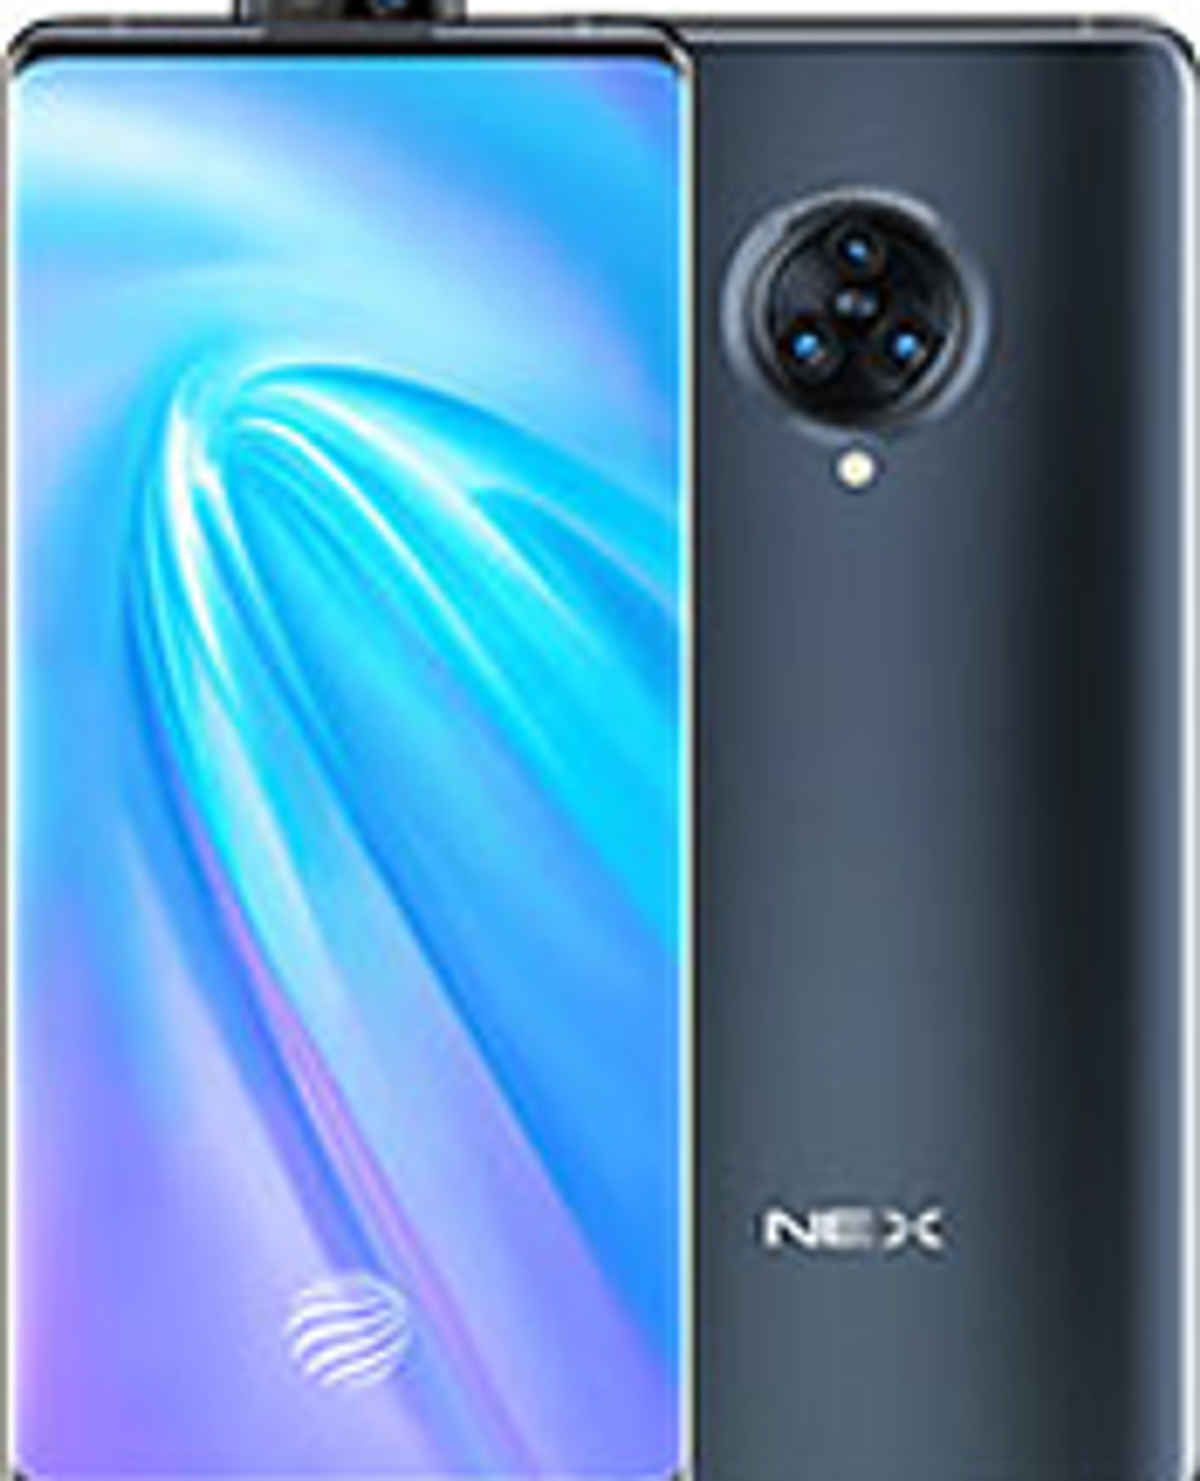 Vivo Nex 3 5g Expected Specs Release Date In India As On 27th